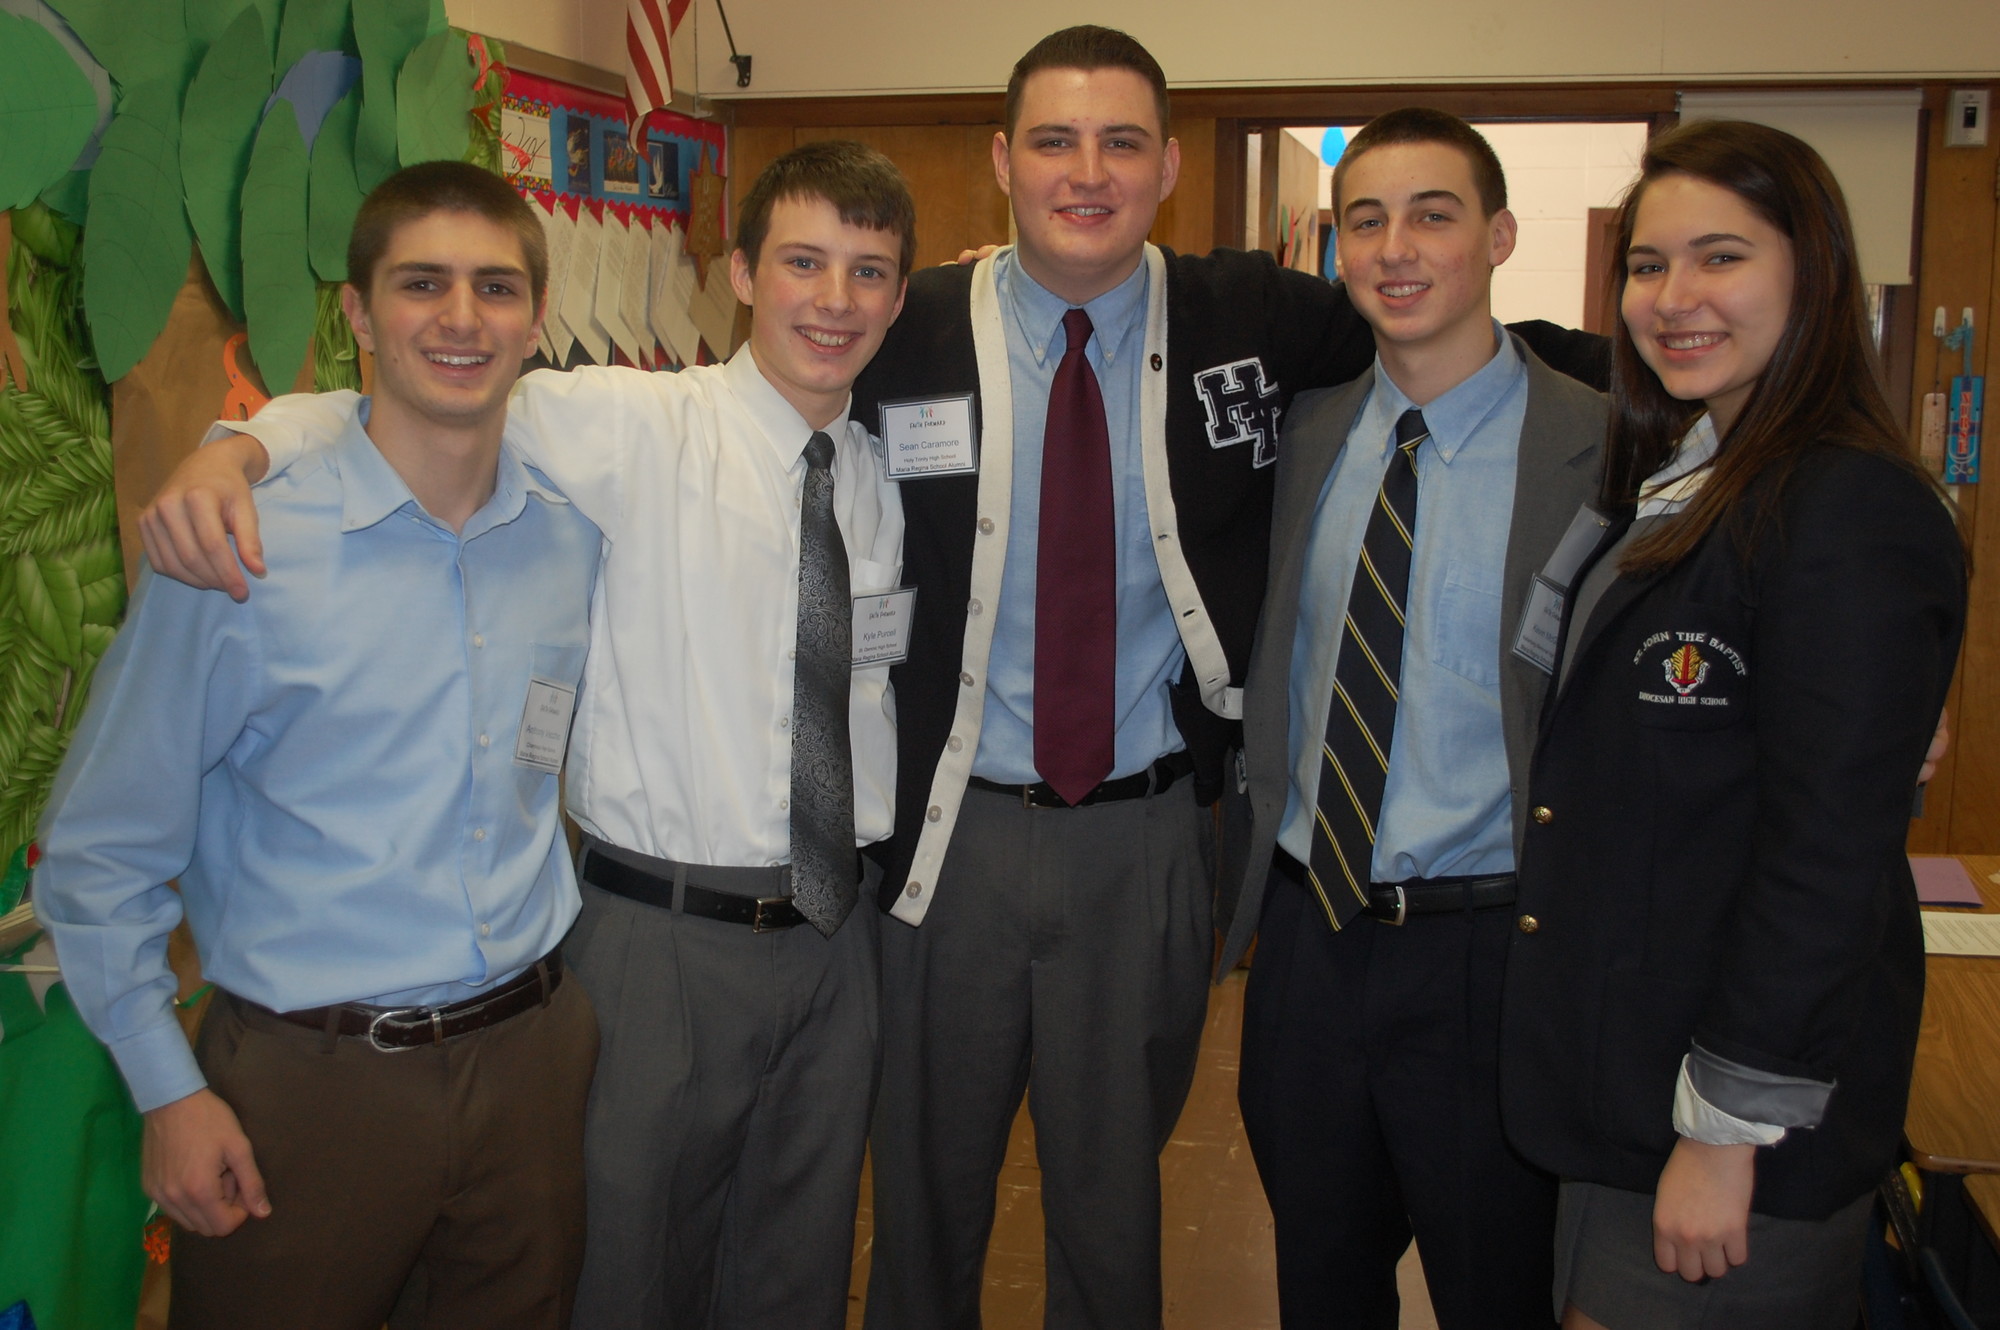 Maria Regina alumni, from left, Anthony Vecchio, Kyle Purcell, Sean Caramore, Kevin McGee and Julia Rooney came back to give tours at the Jan. 25 open house.